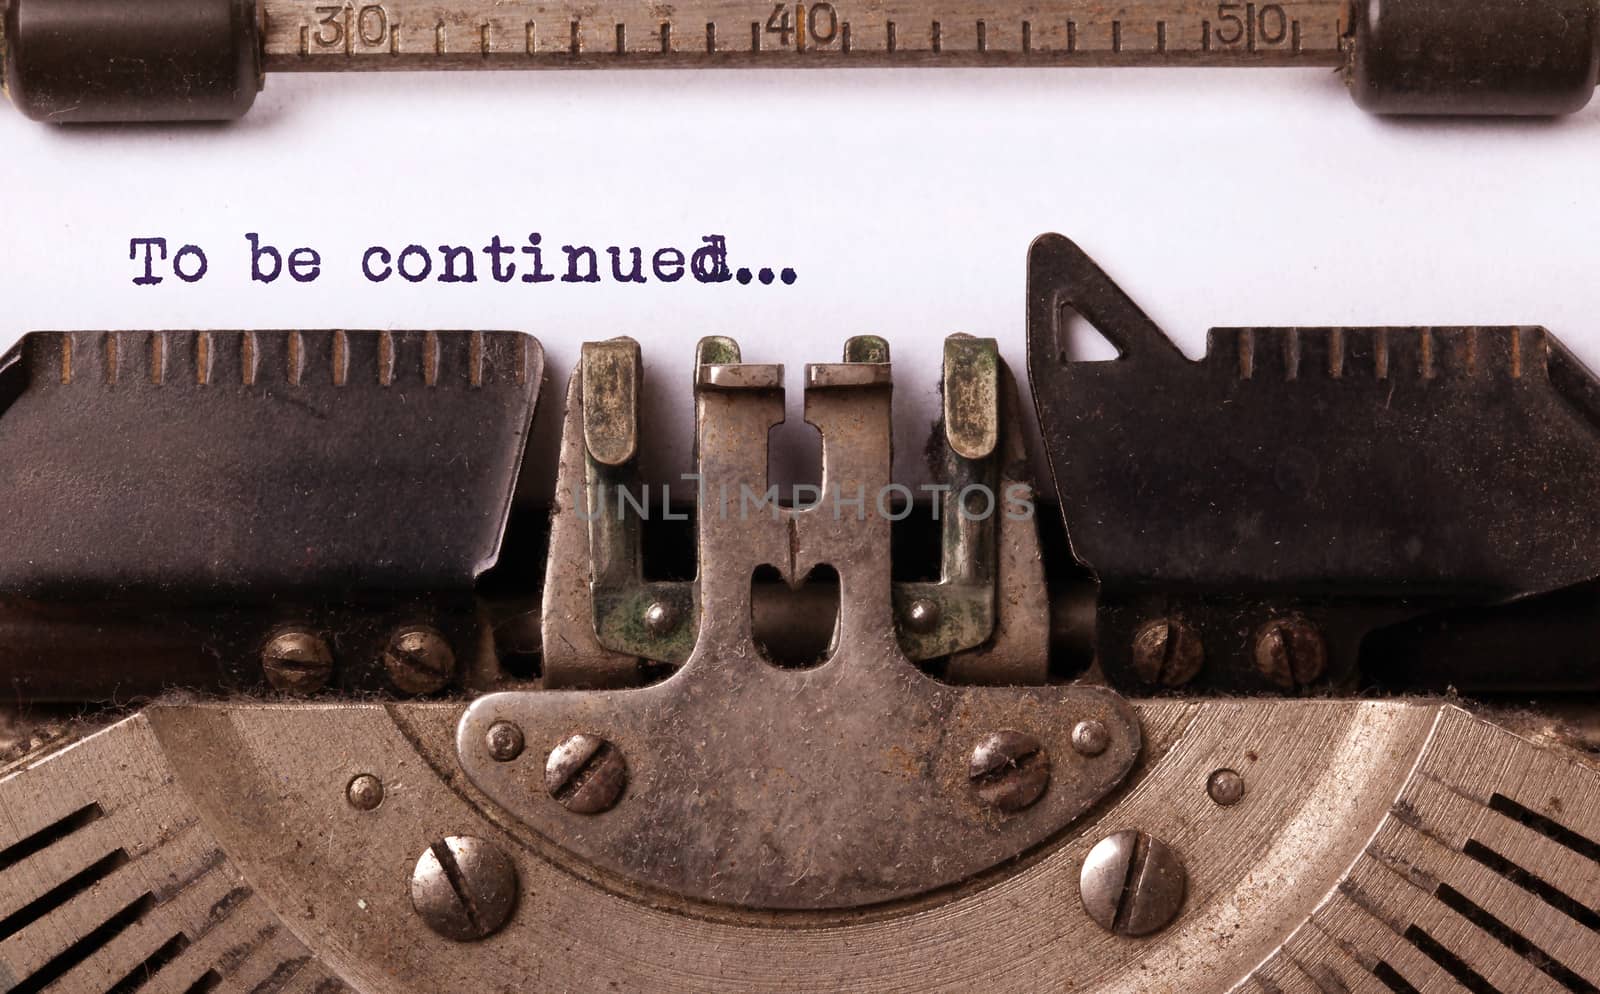 Vintage inscription made by old typewriter, to be continued